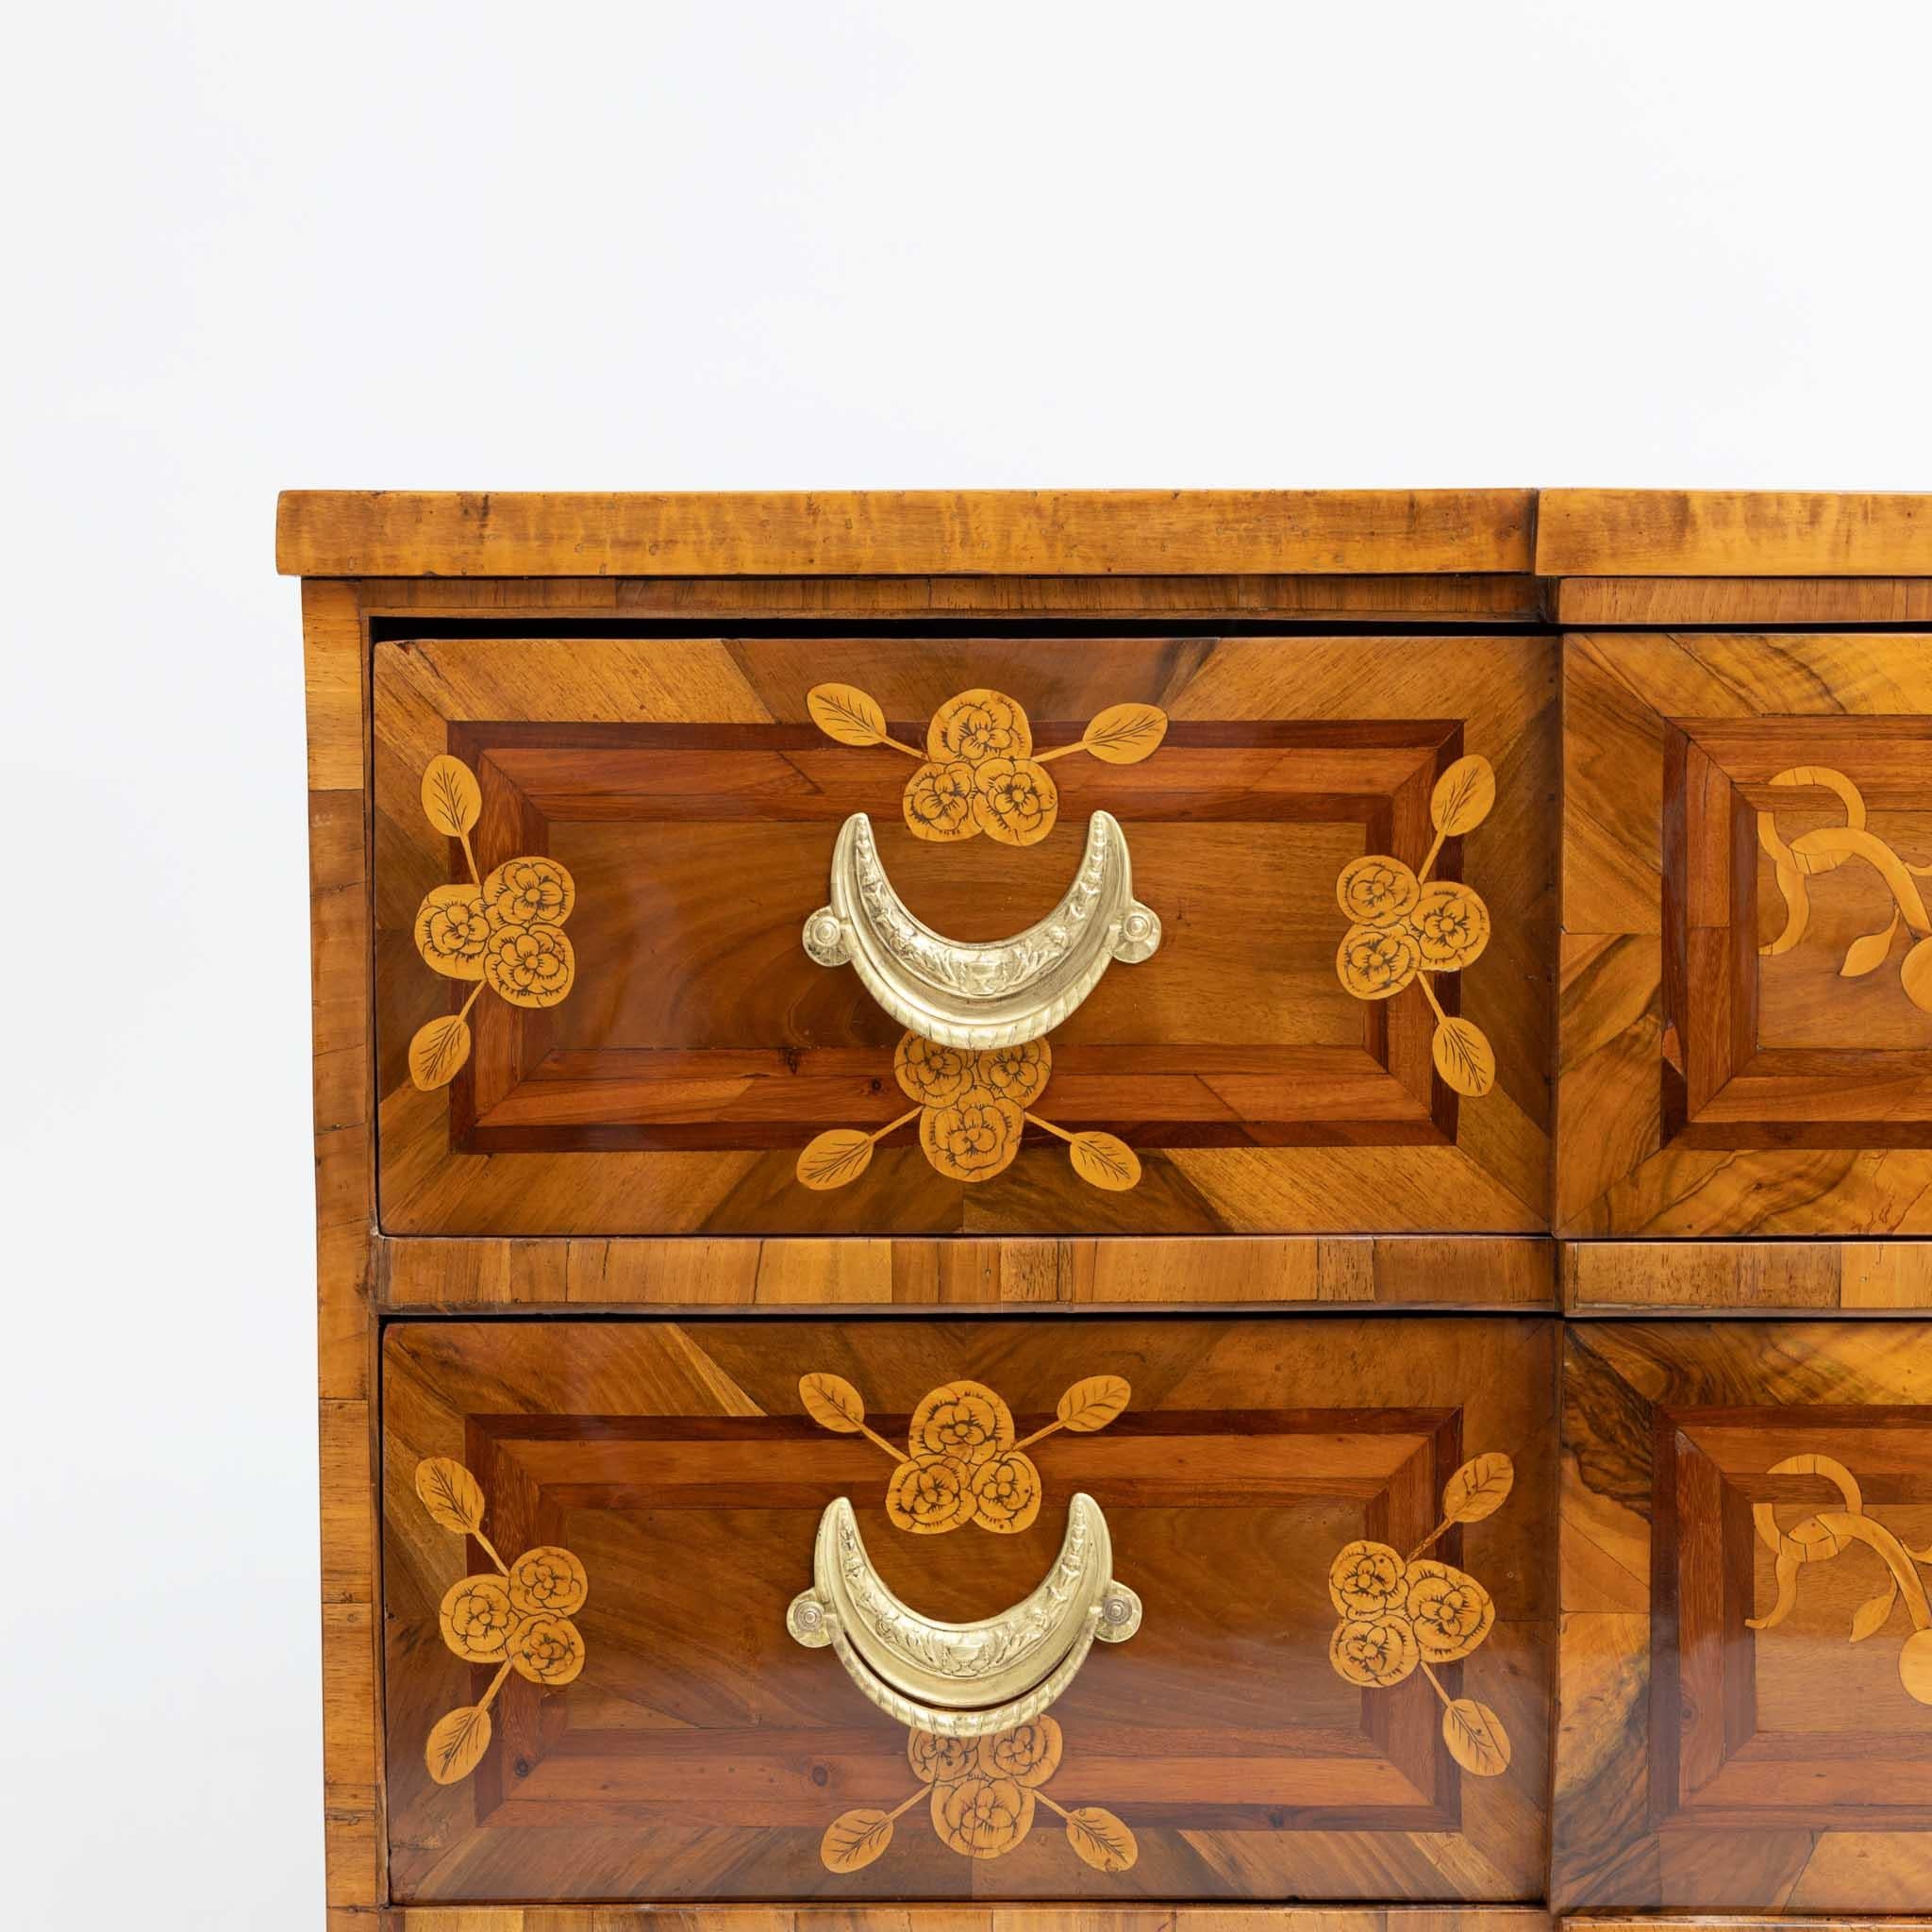 Veneer Louis Seize Marquetry Chest of Drawers, Walnut veneered, Late 18th Century For Sale